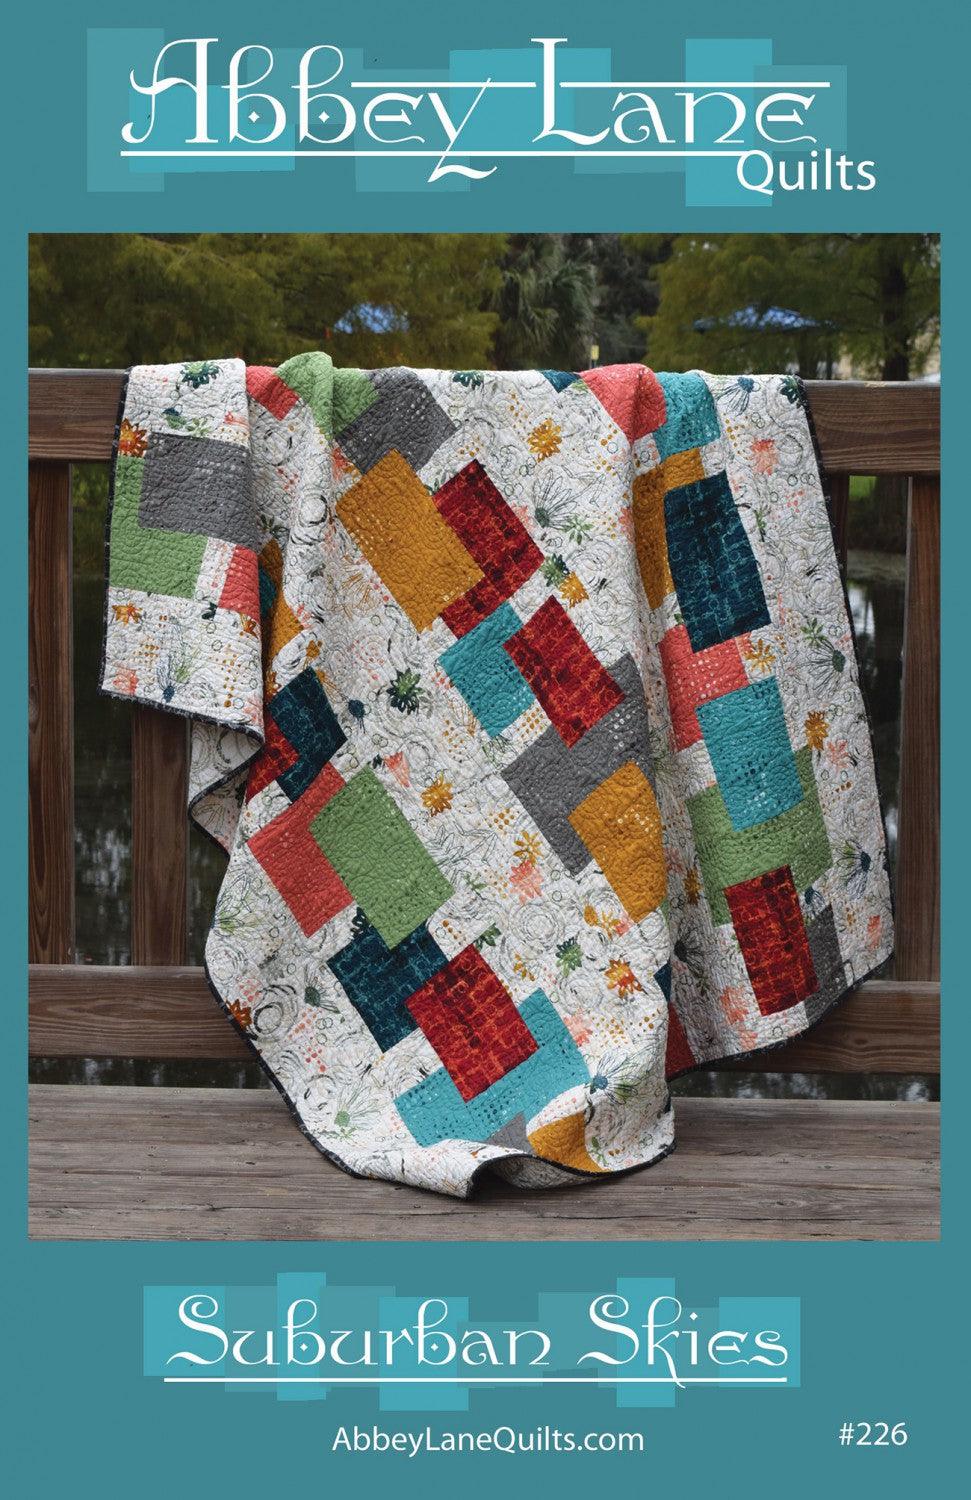 Suburban Skies - Quilt Pattern - Abbey Lane Quilts - Kawartha Quilting and Sewing LTD.